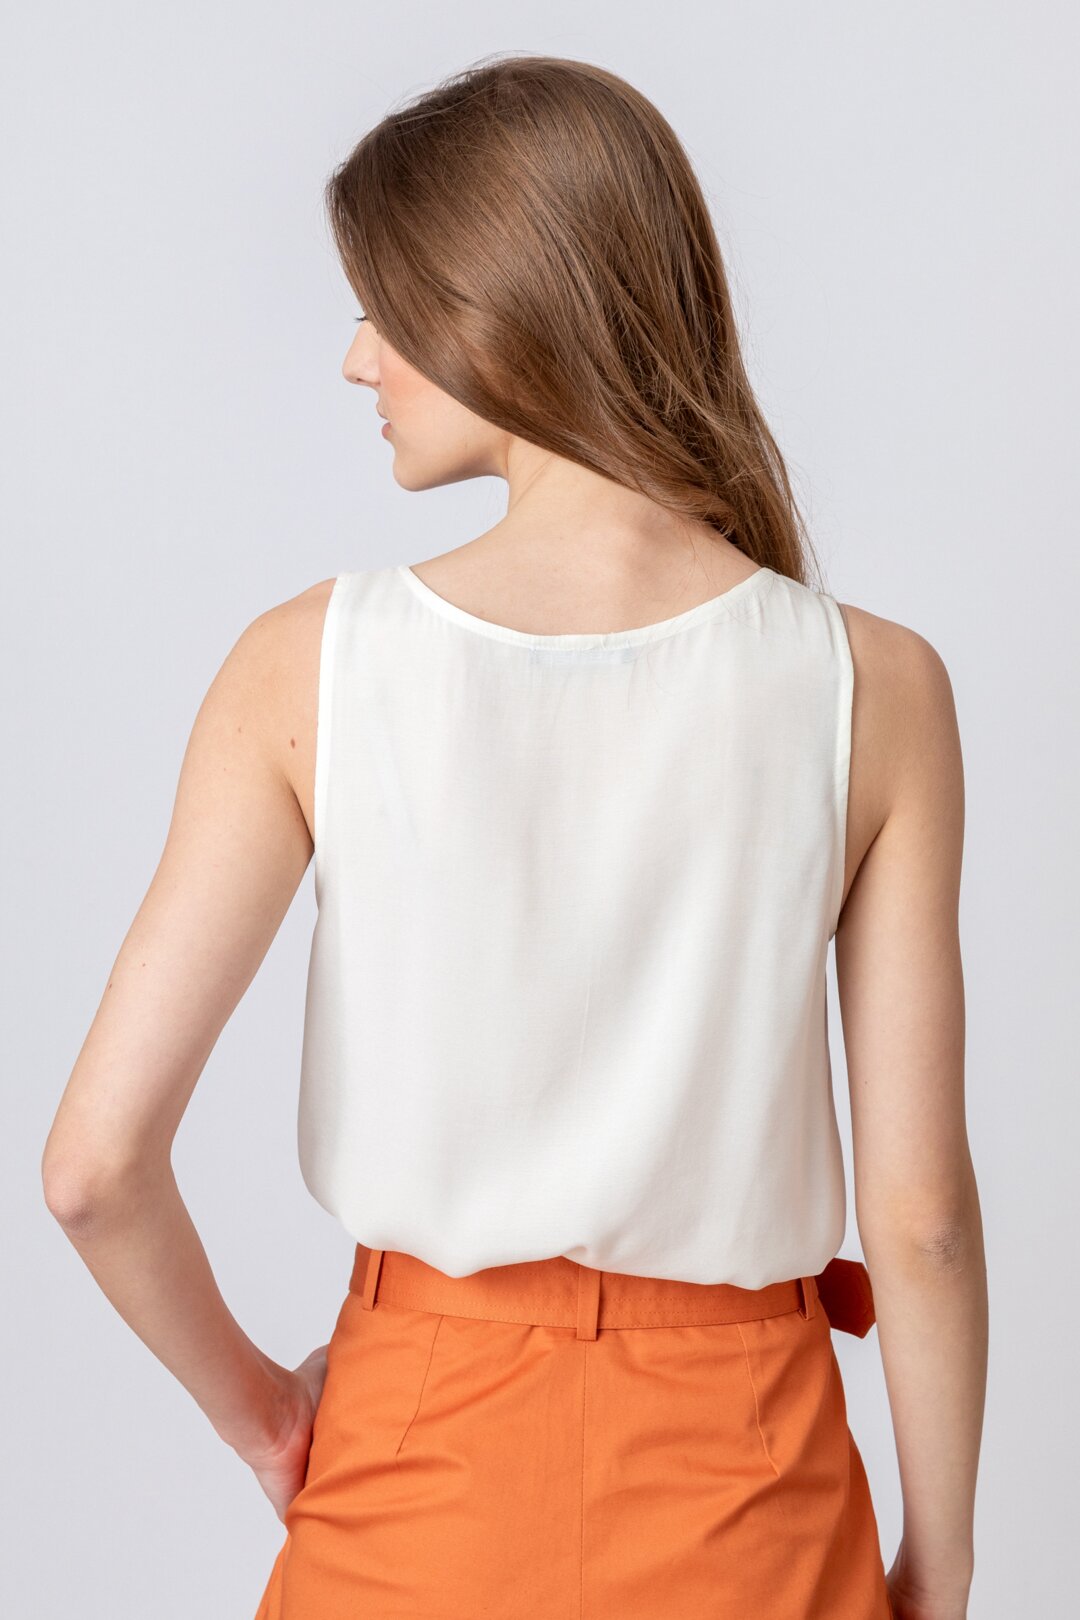 Solid Blouse, Sleeveless